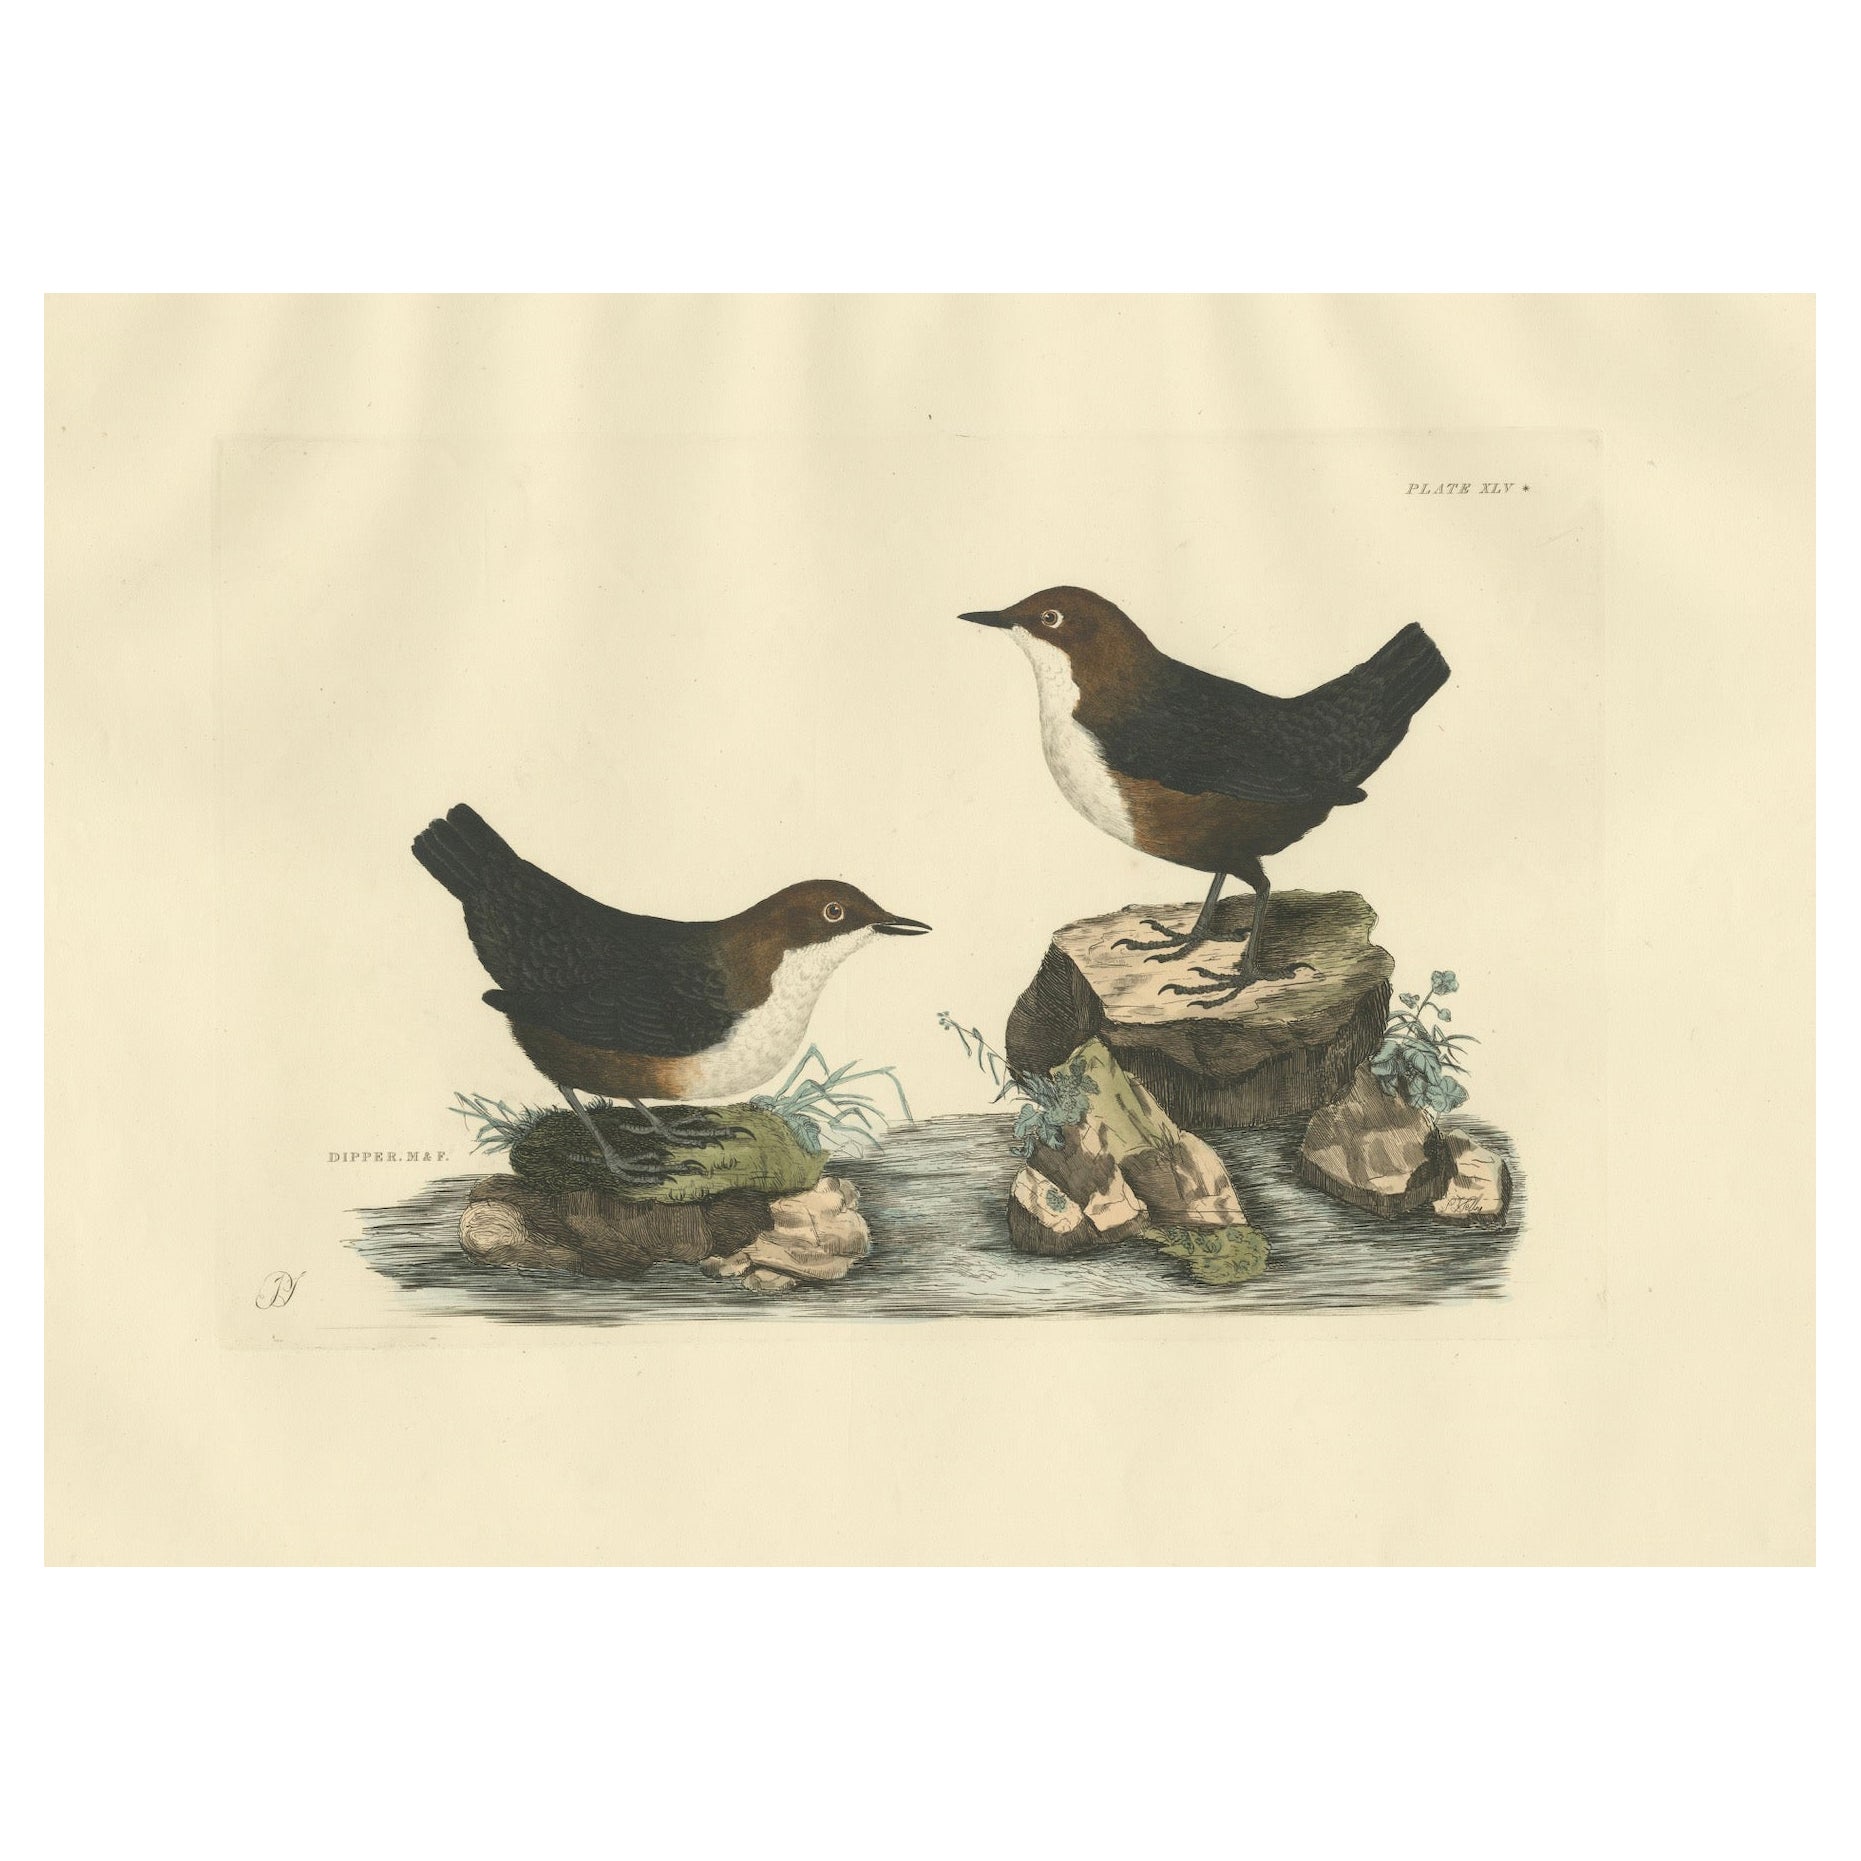 Aquatic Songbirds named Dippers Engraved by Selby and Hand-Colored, 1826